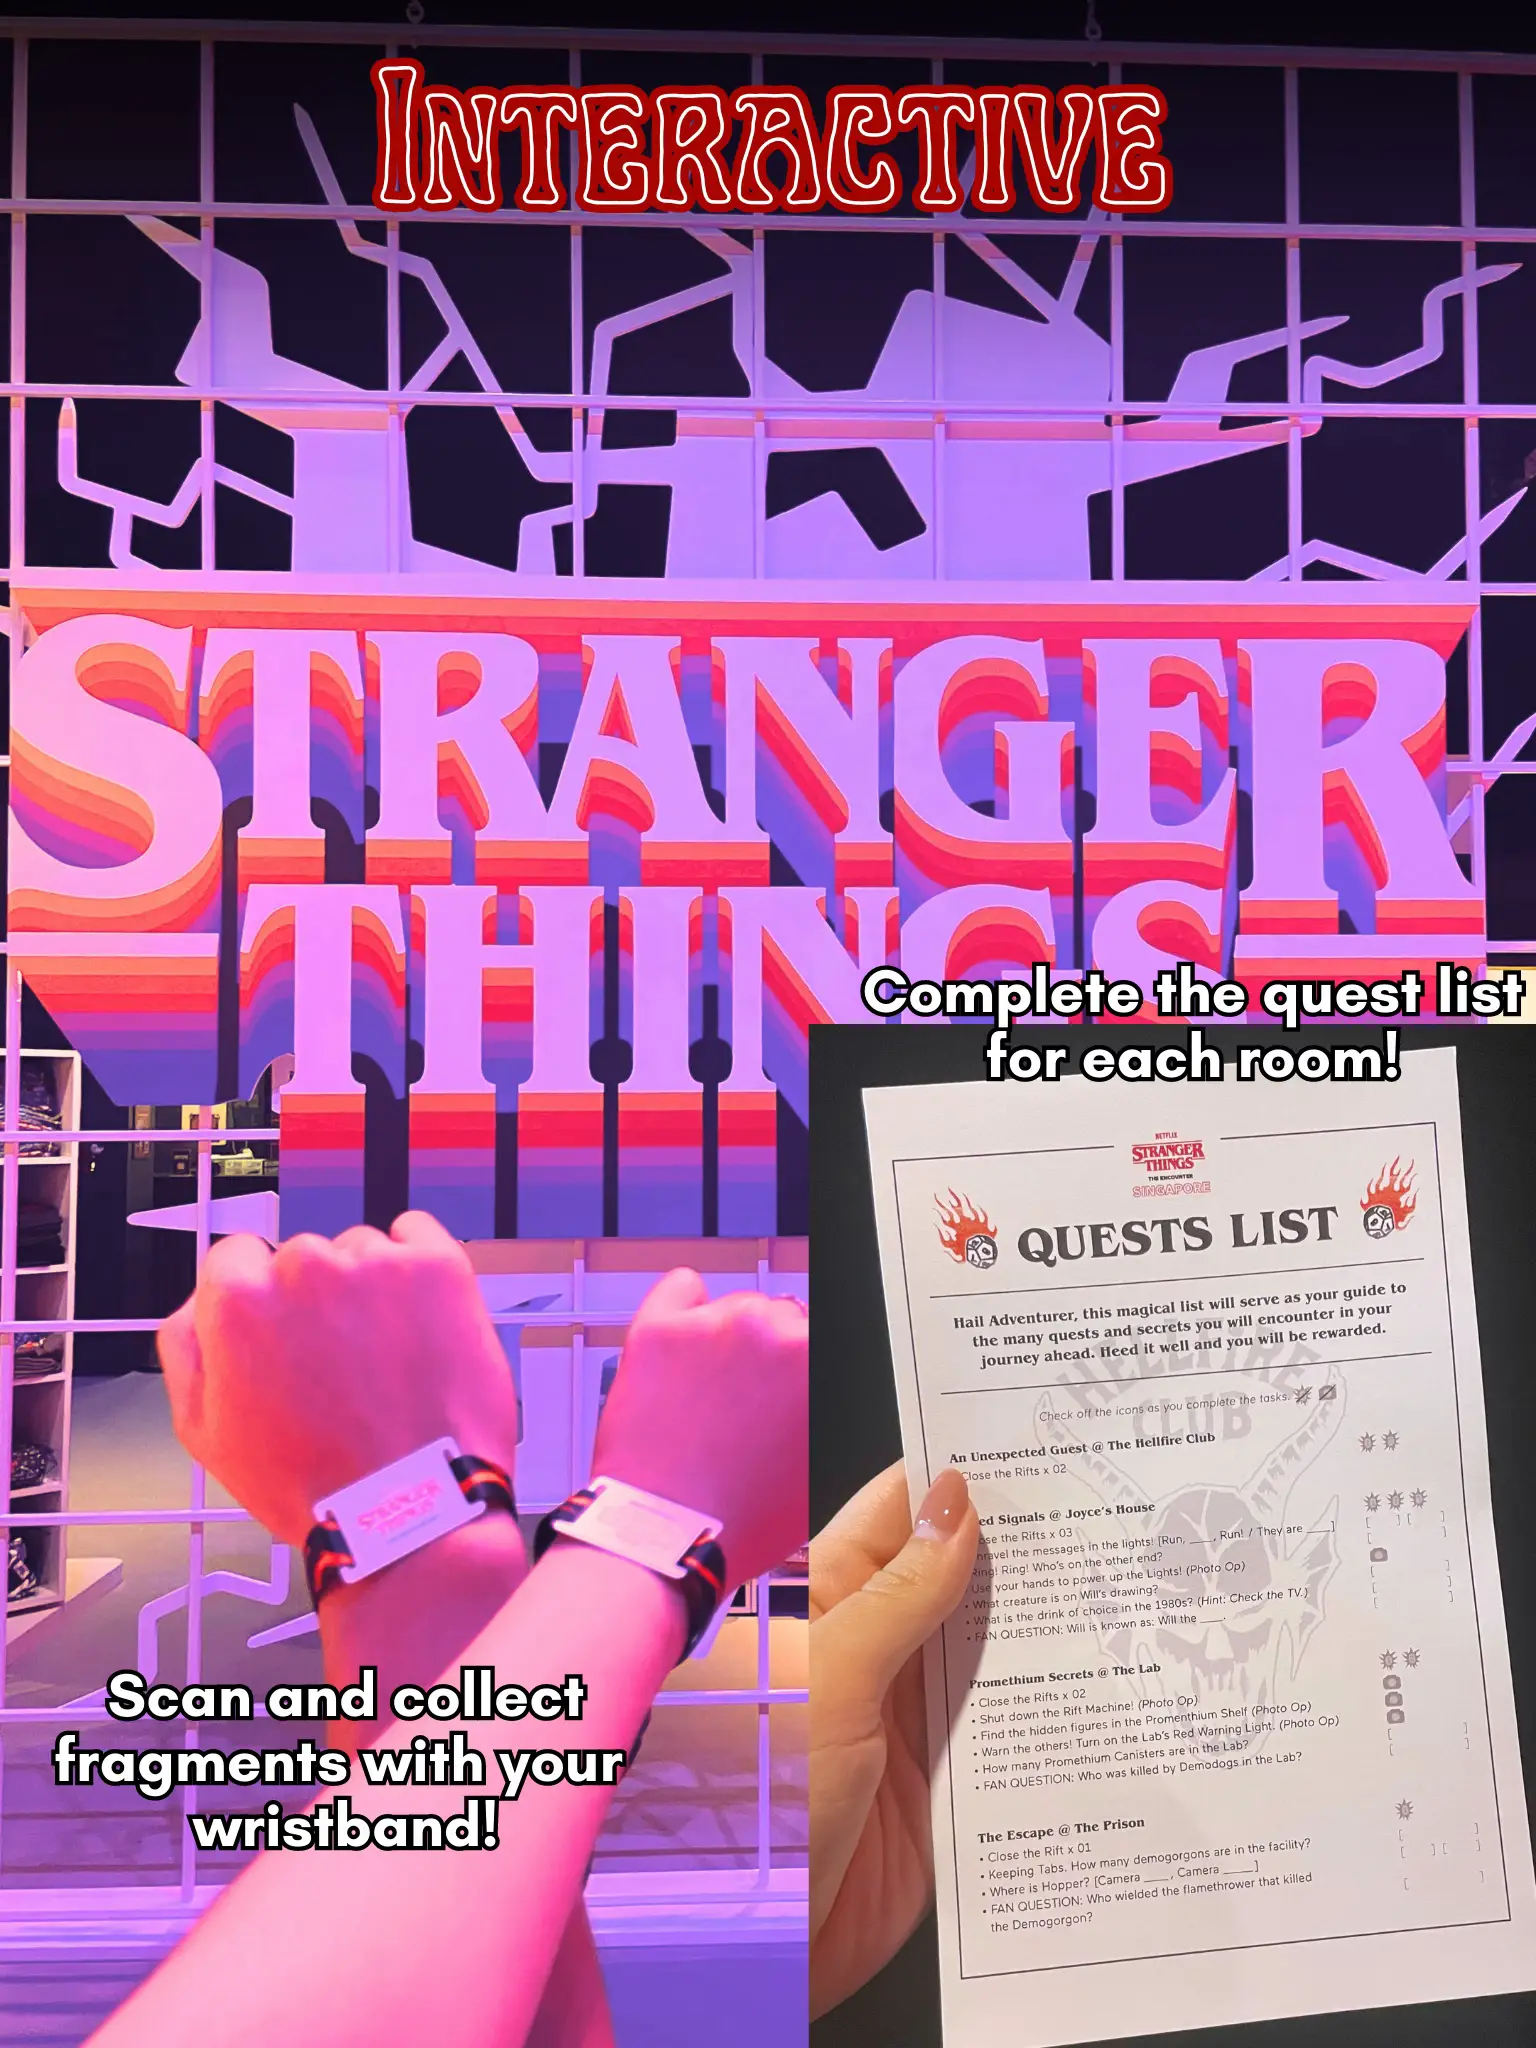 Stranger Things - The Encounter in Singapore - Klook Singapore